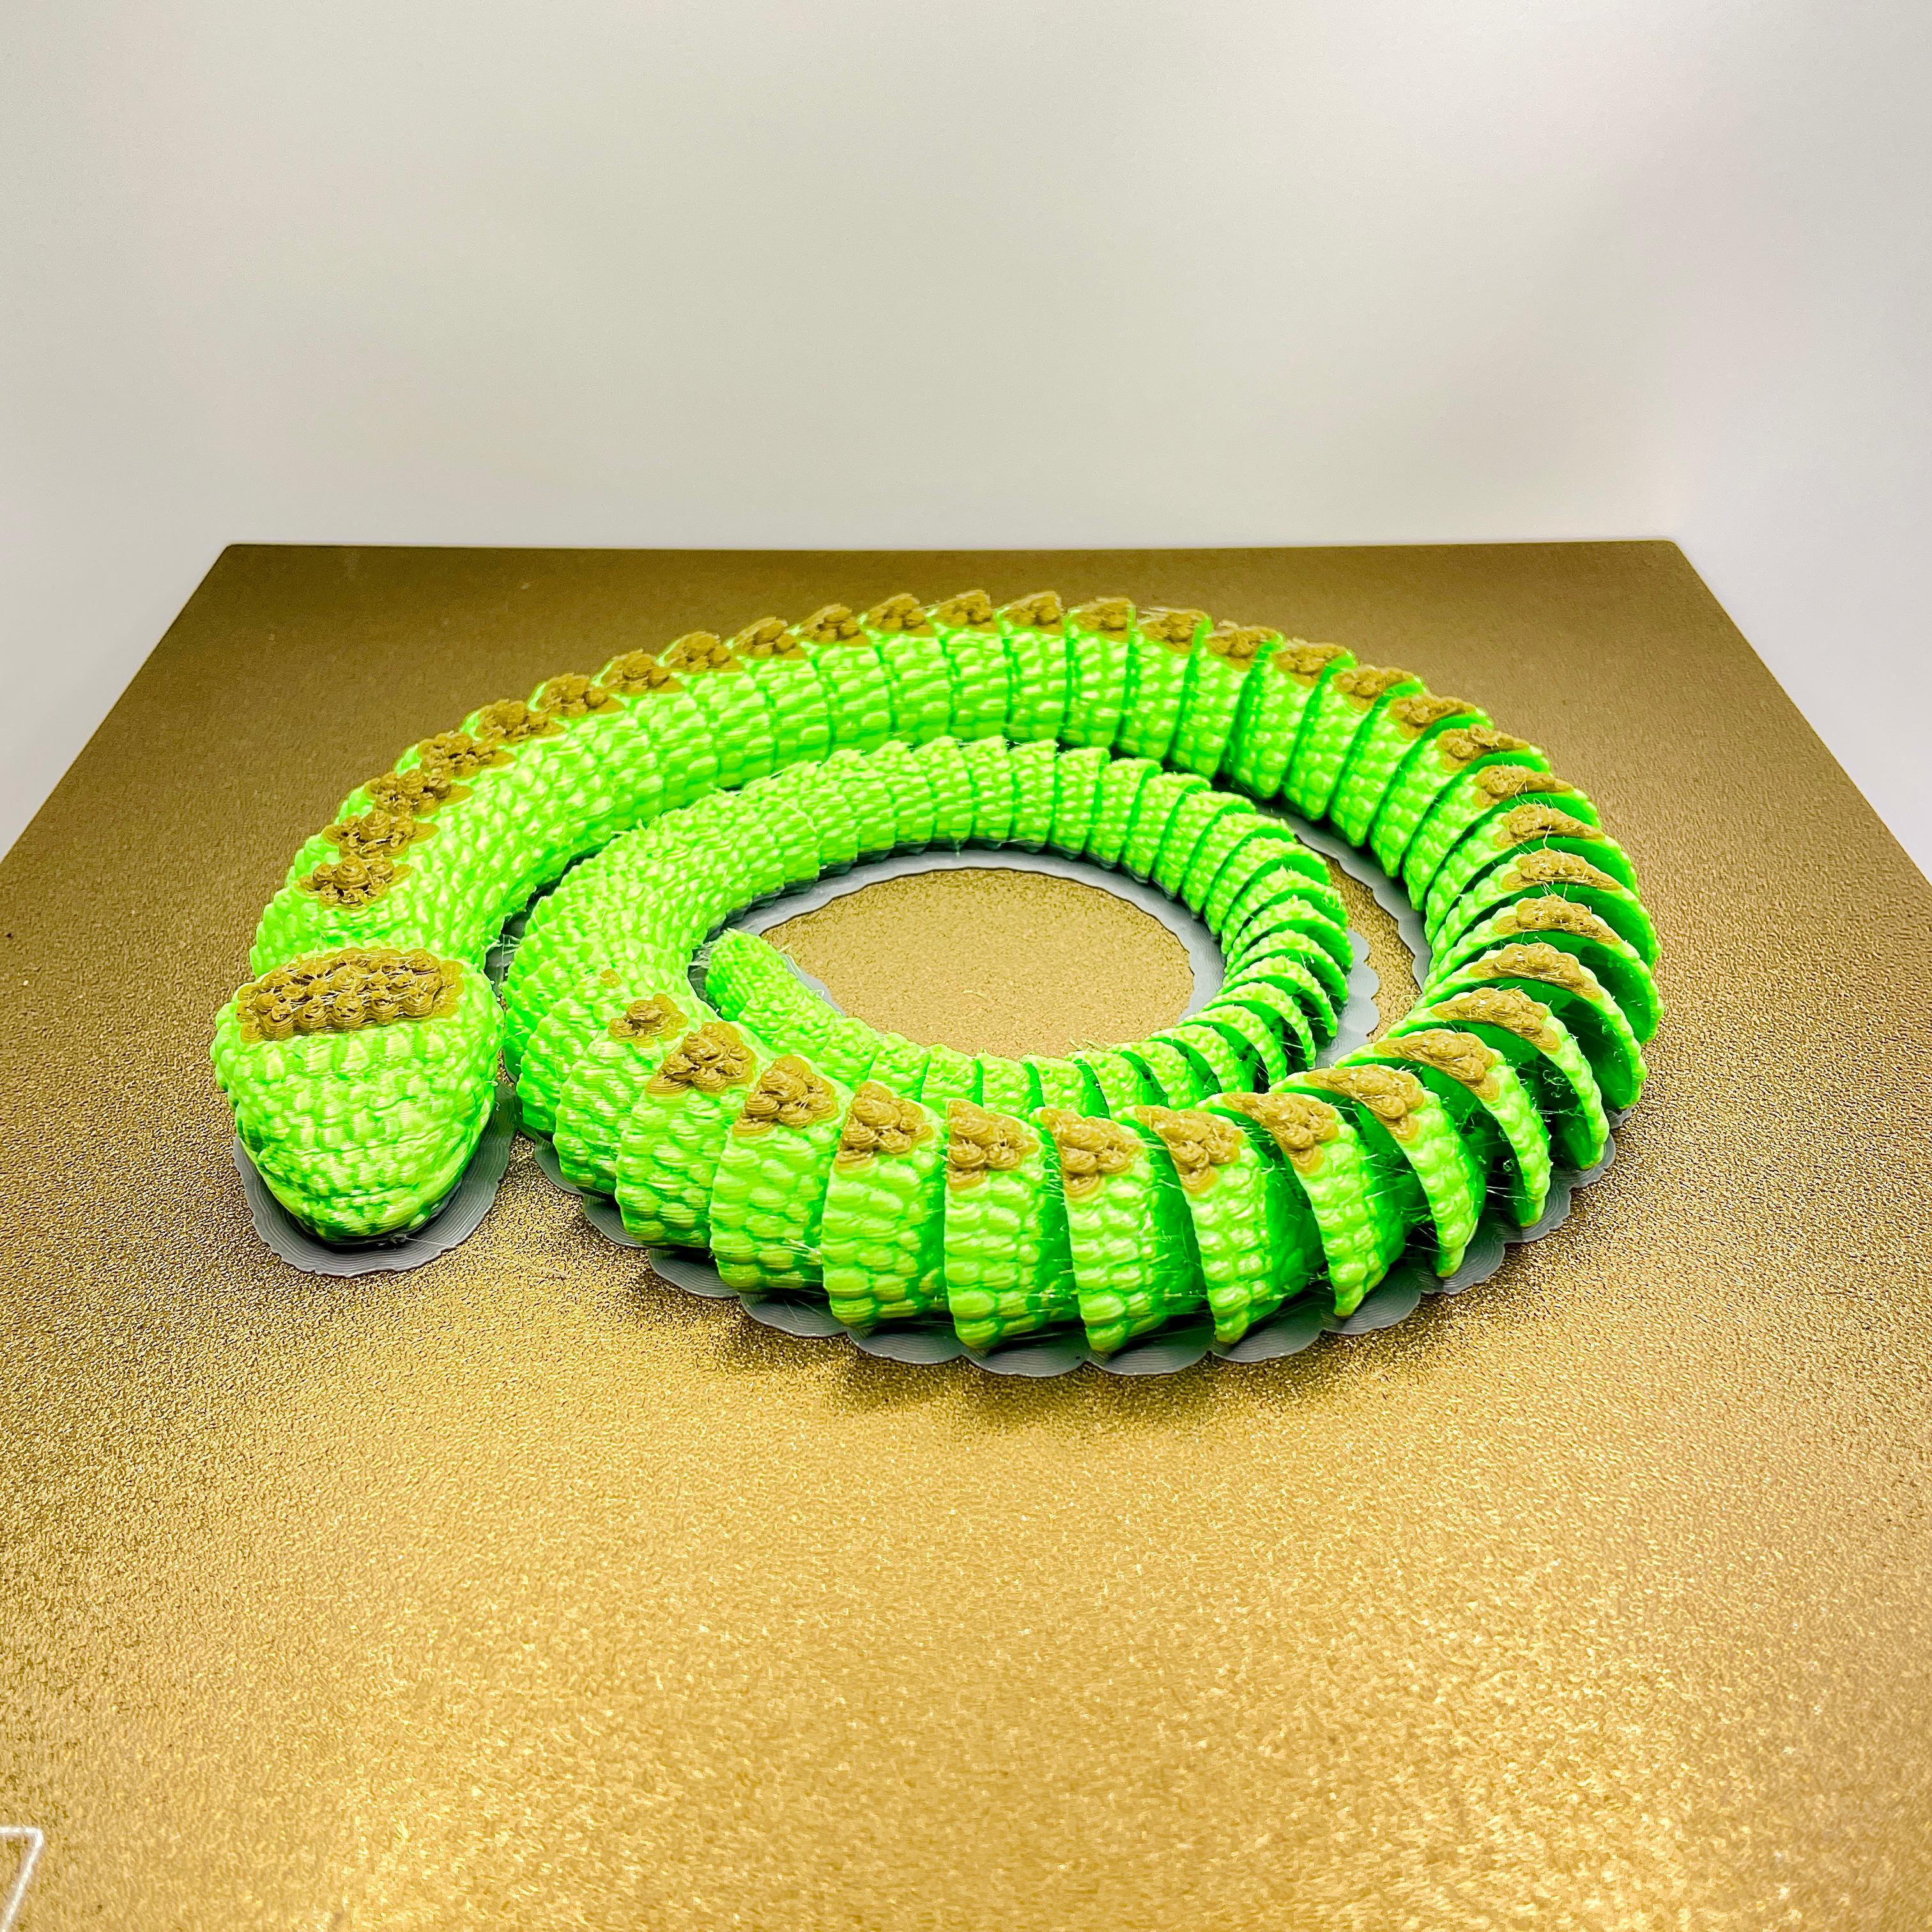 Giant Articulated Viper Snake 95cm / 37,4Inch - Flexi - Print in Place - No Supports 3d model